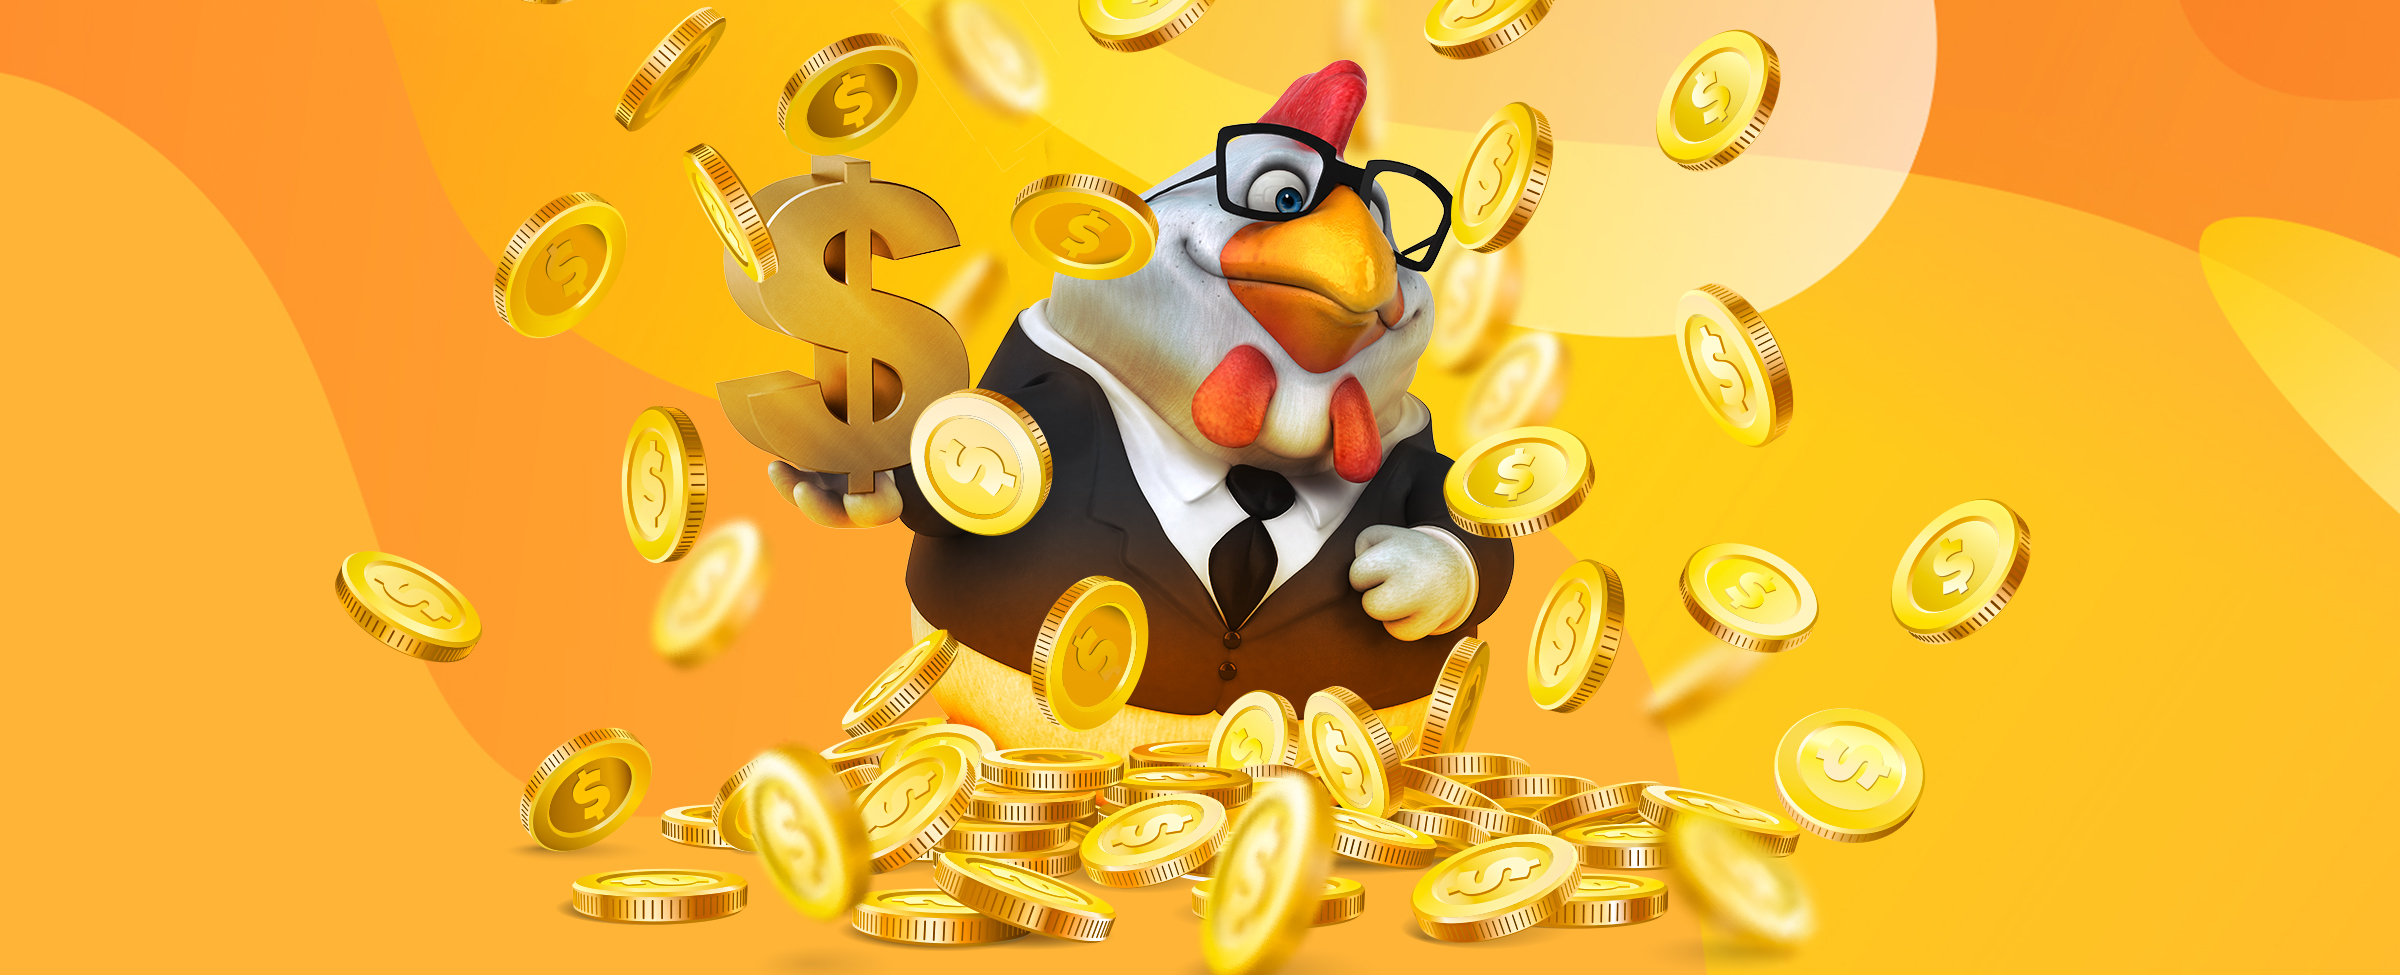 A 3D-animated rooster wearing a suit and tie with oversized glasses stands amidst an exploding pile of oversized gold coins, set against a two-tone orange abstract background.